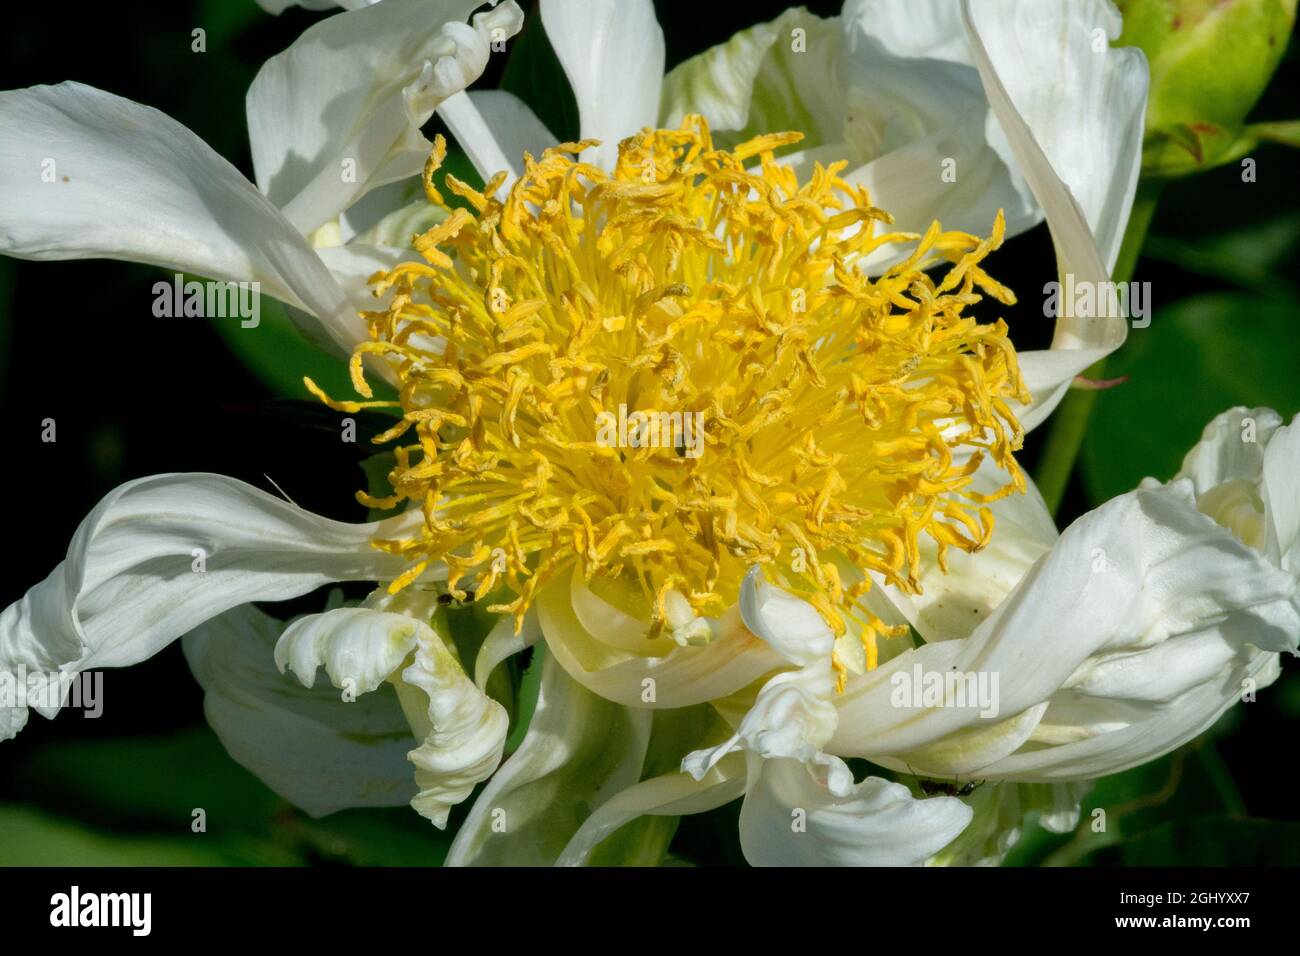 White Peony flower¨Spider Green' Paeonia lactiflora, Narrow, fluted and twisted flower petals, yellow stamens Stock Photo